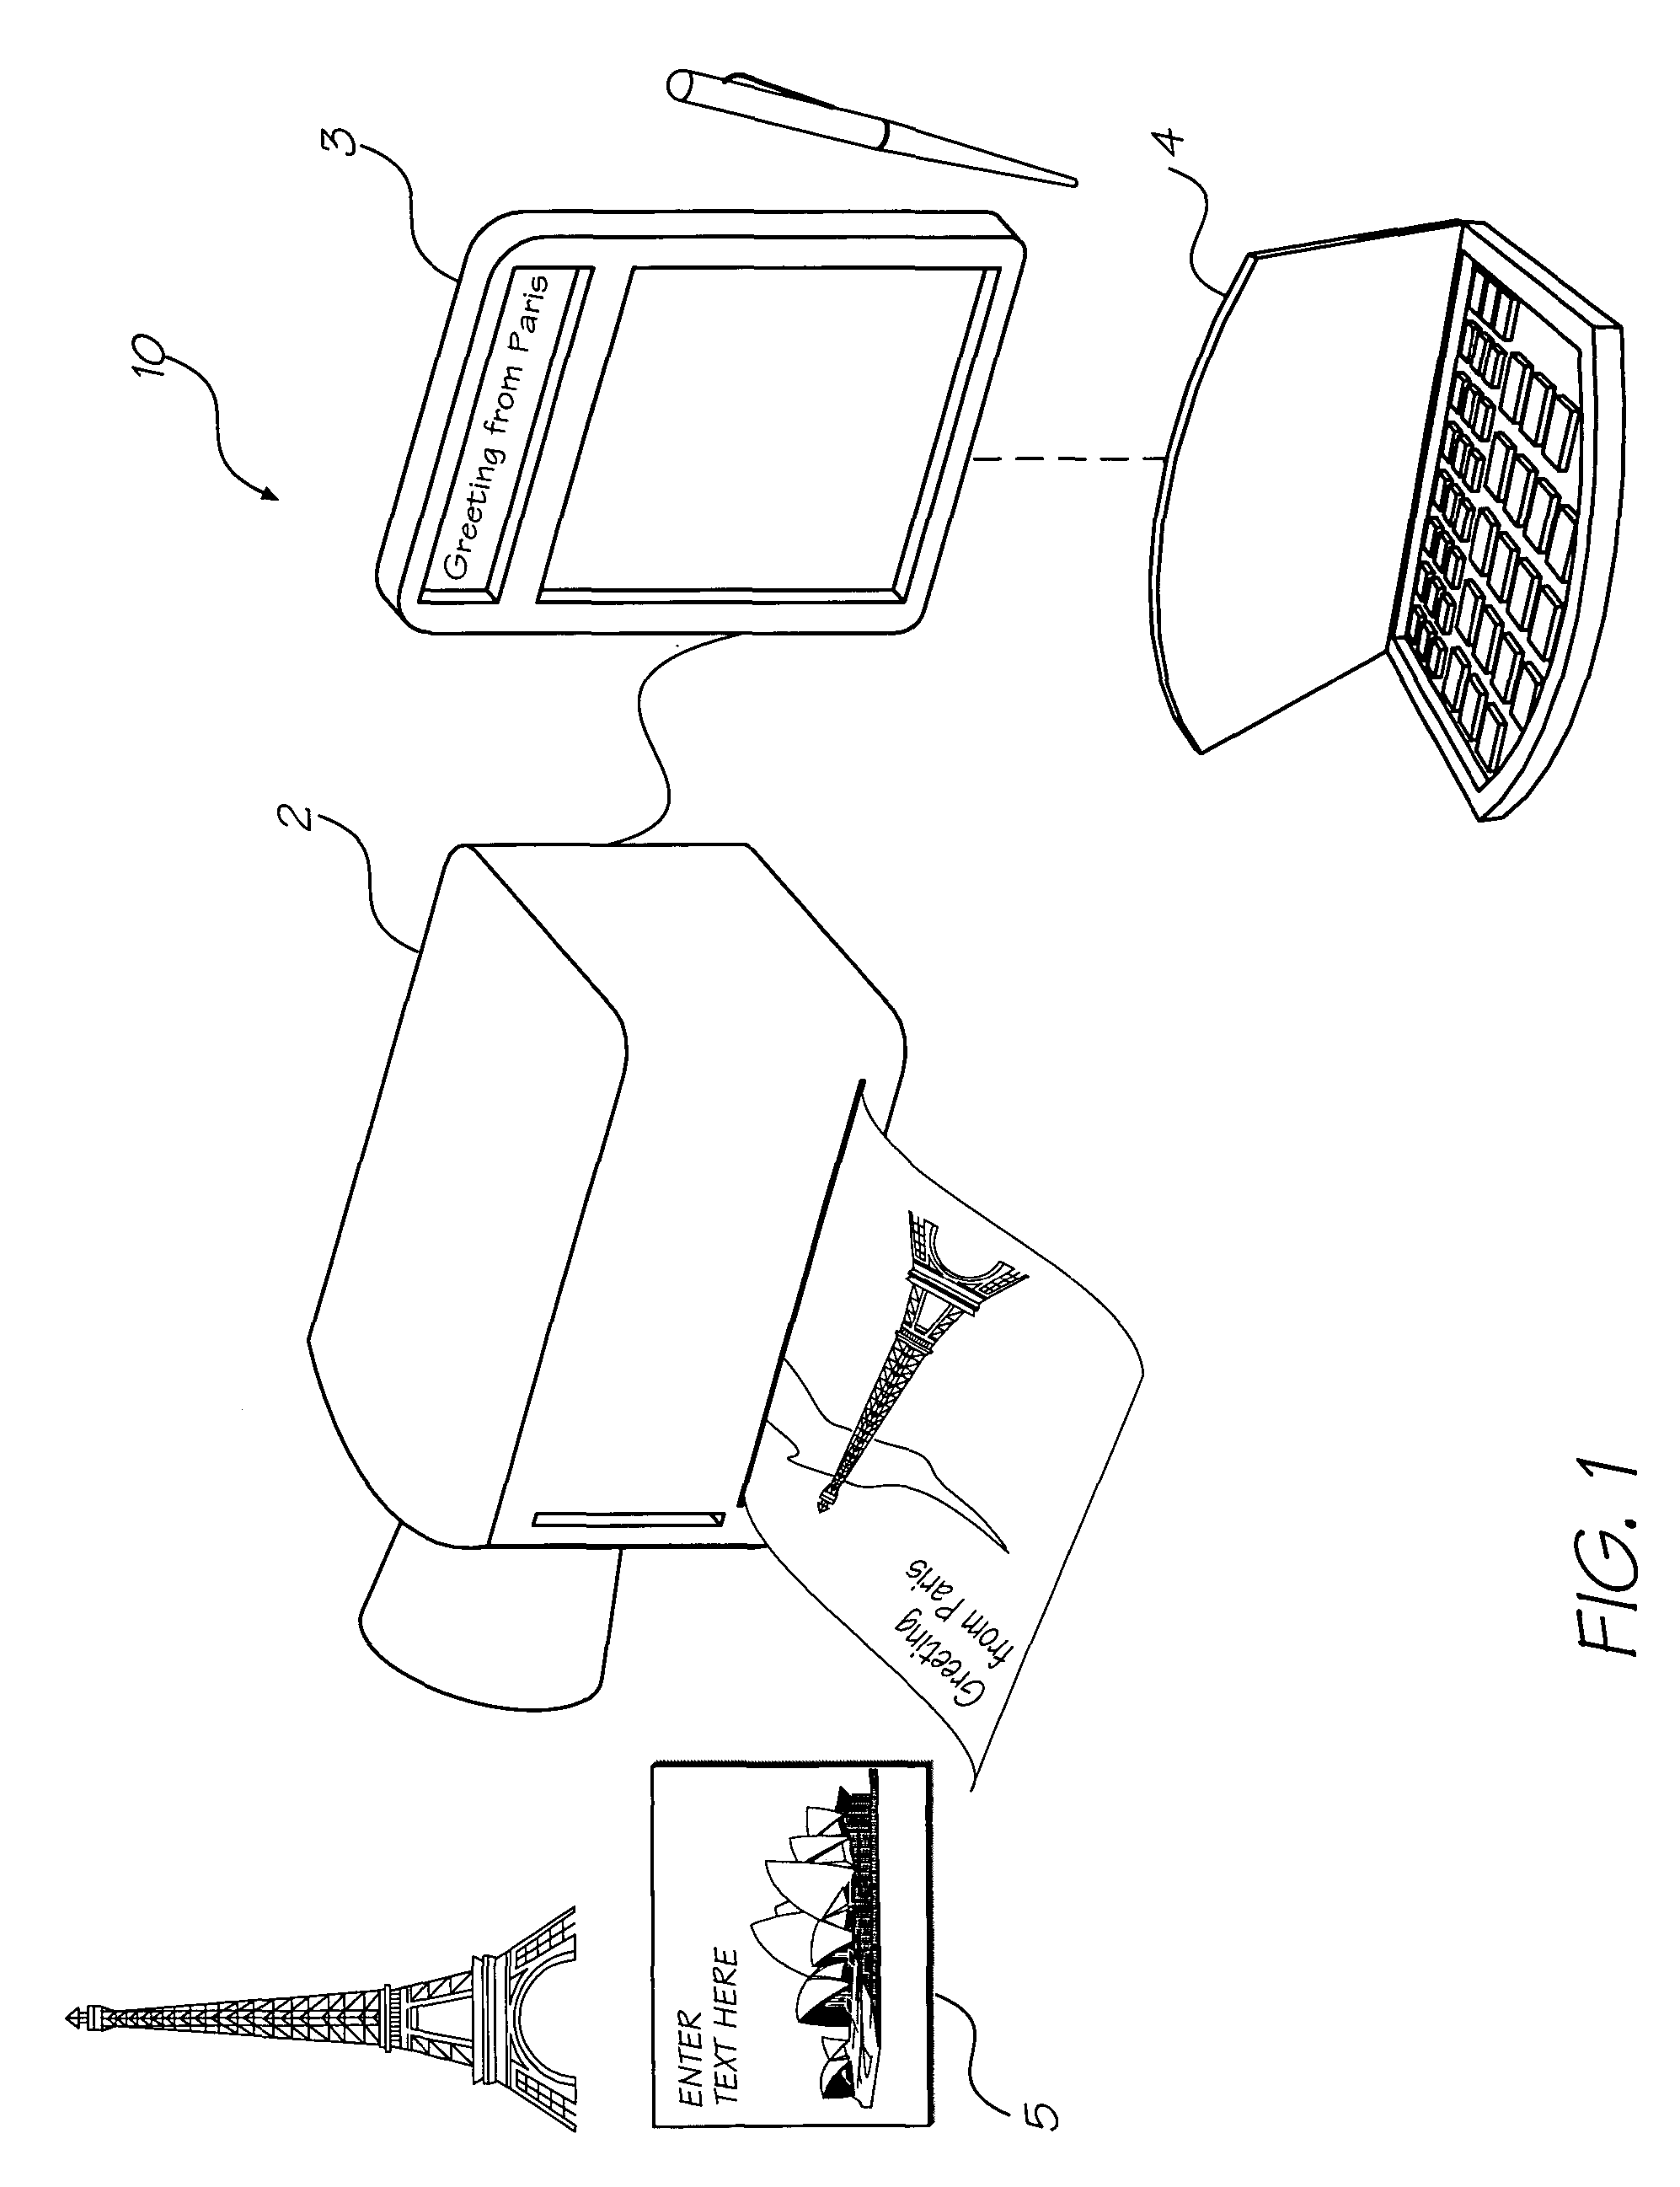 Apparatus for adding user-supplied text to a digital still image